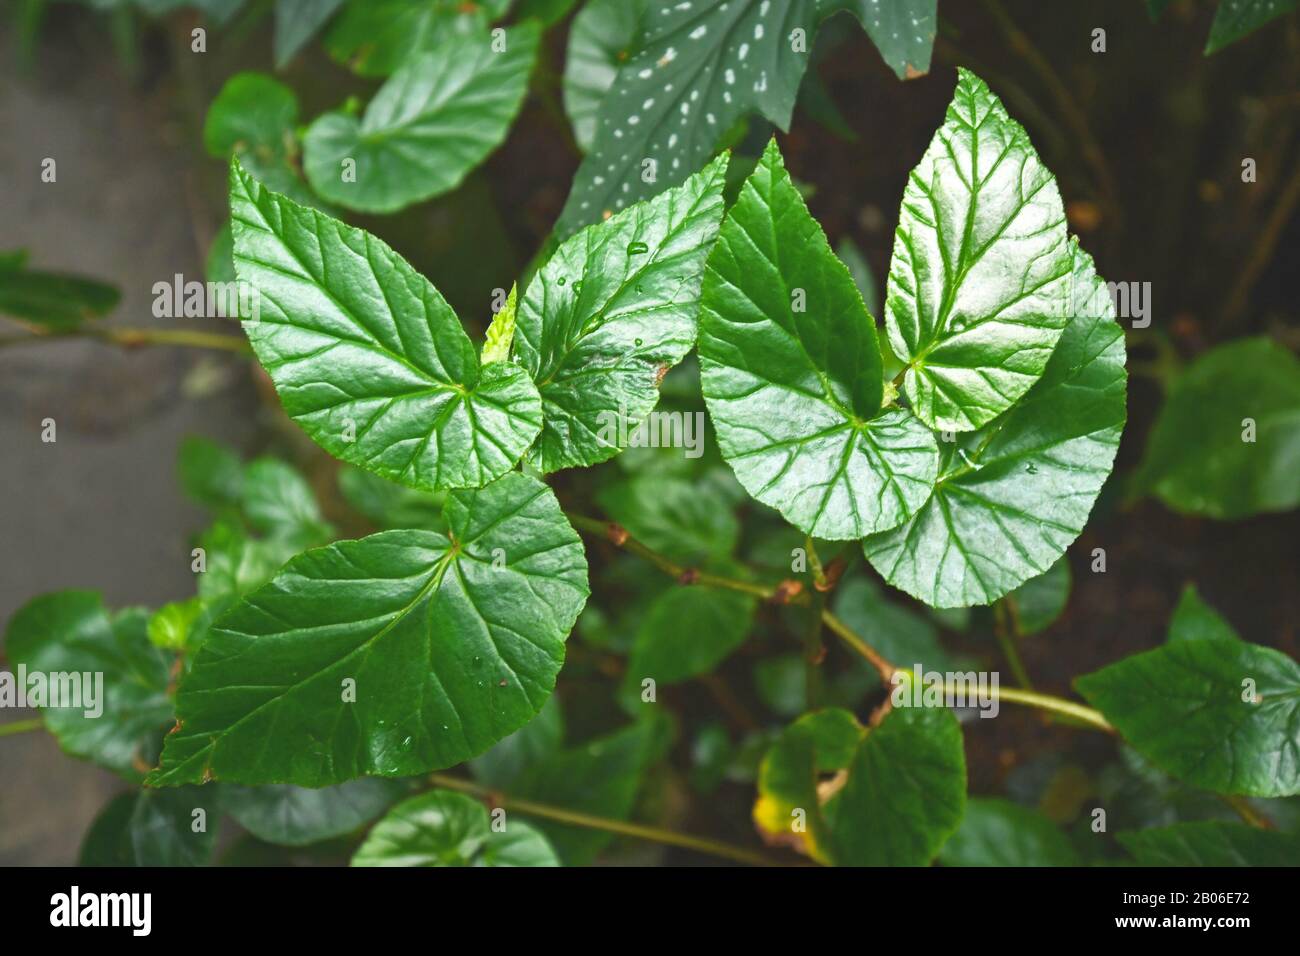 Tropical 'Begonia Domingensis' plant with small rounded and leathery leaves, a slow growing species from the West Indies Stock Photo